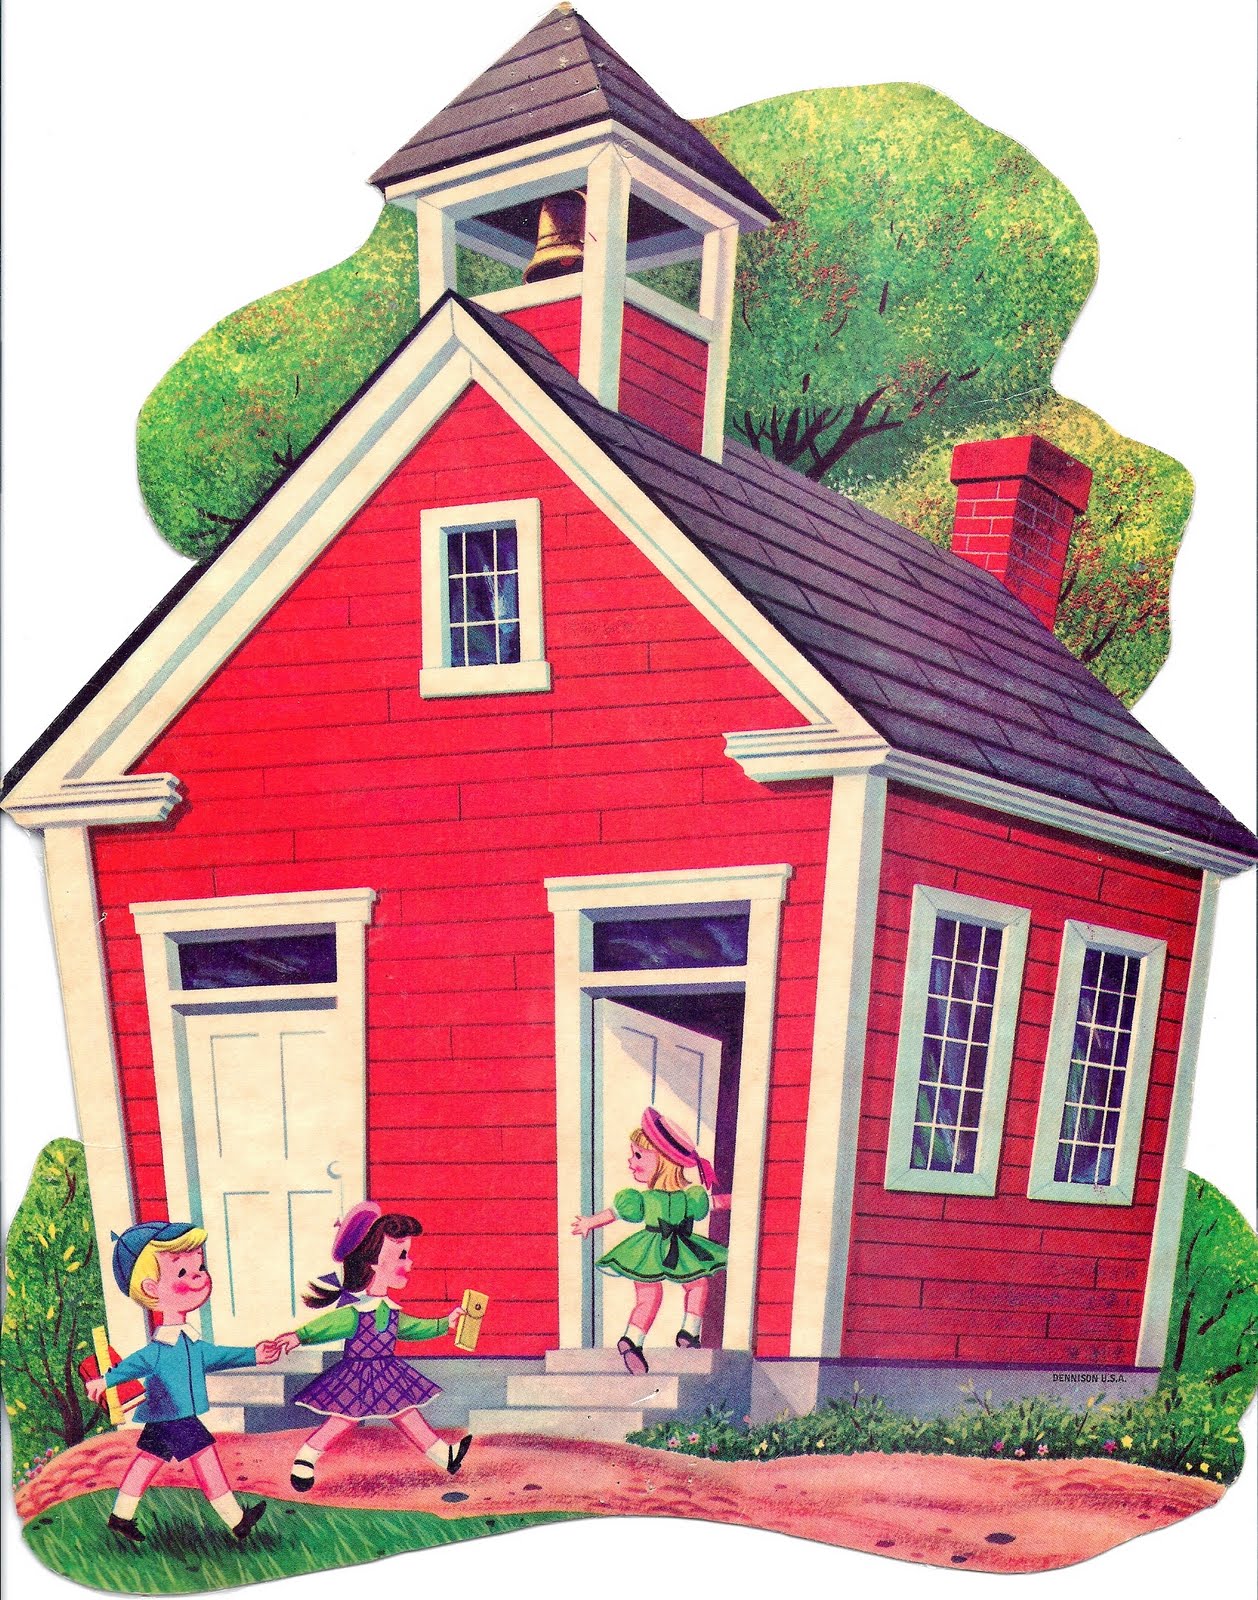 School house red schoolhouse clipart 4